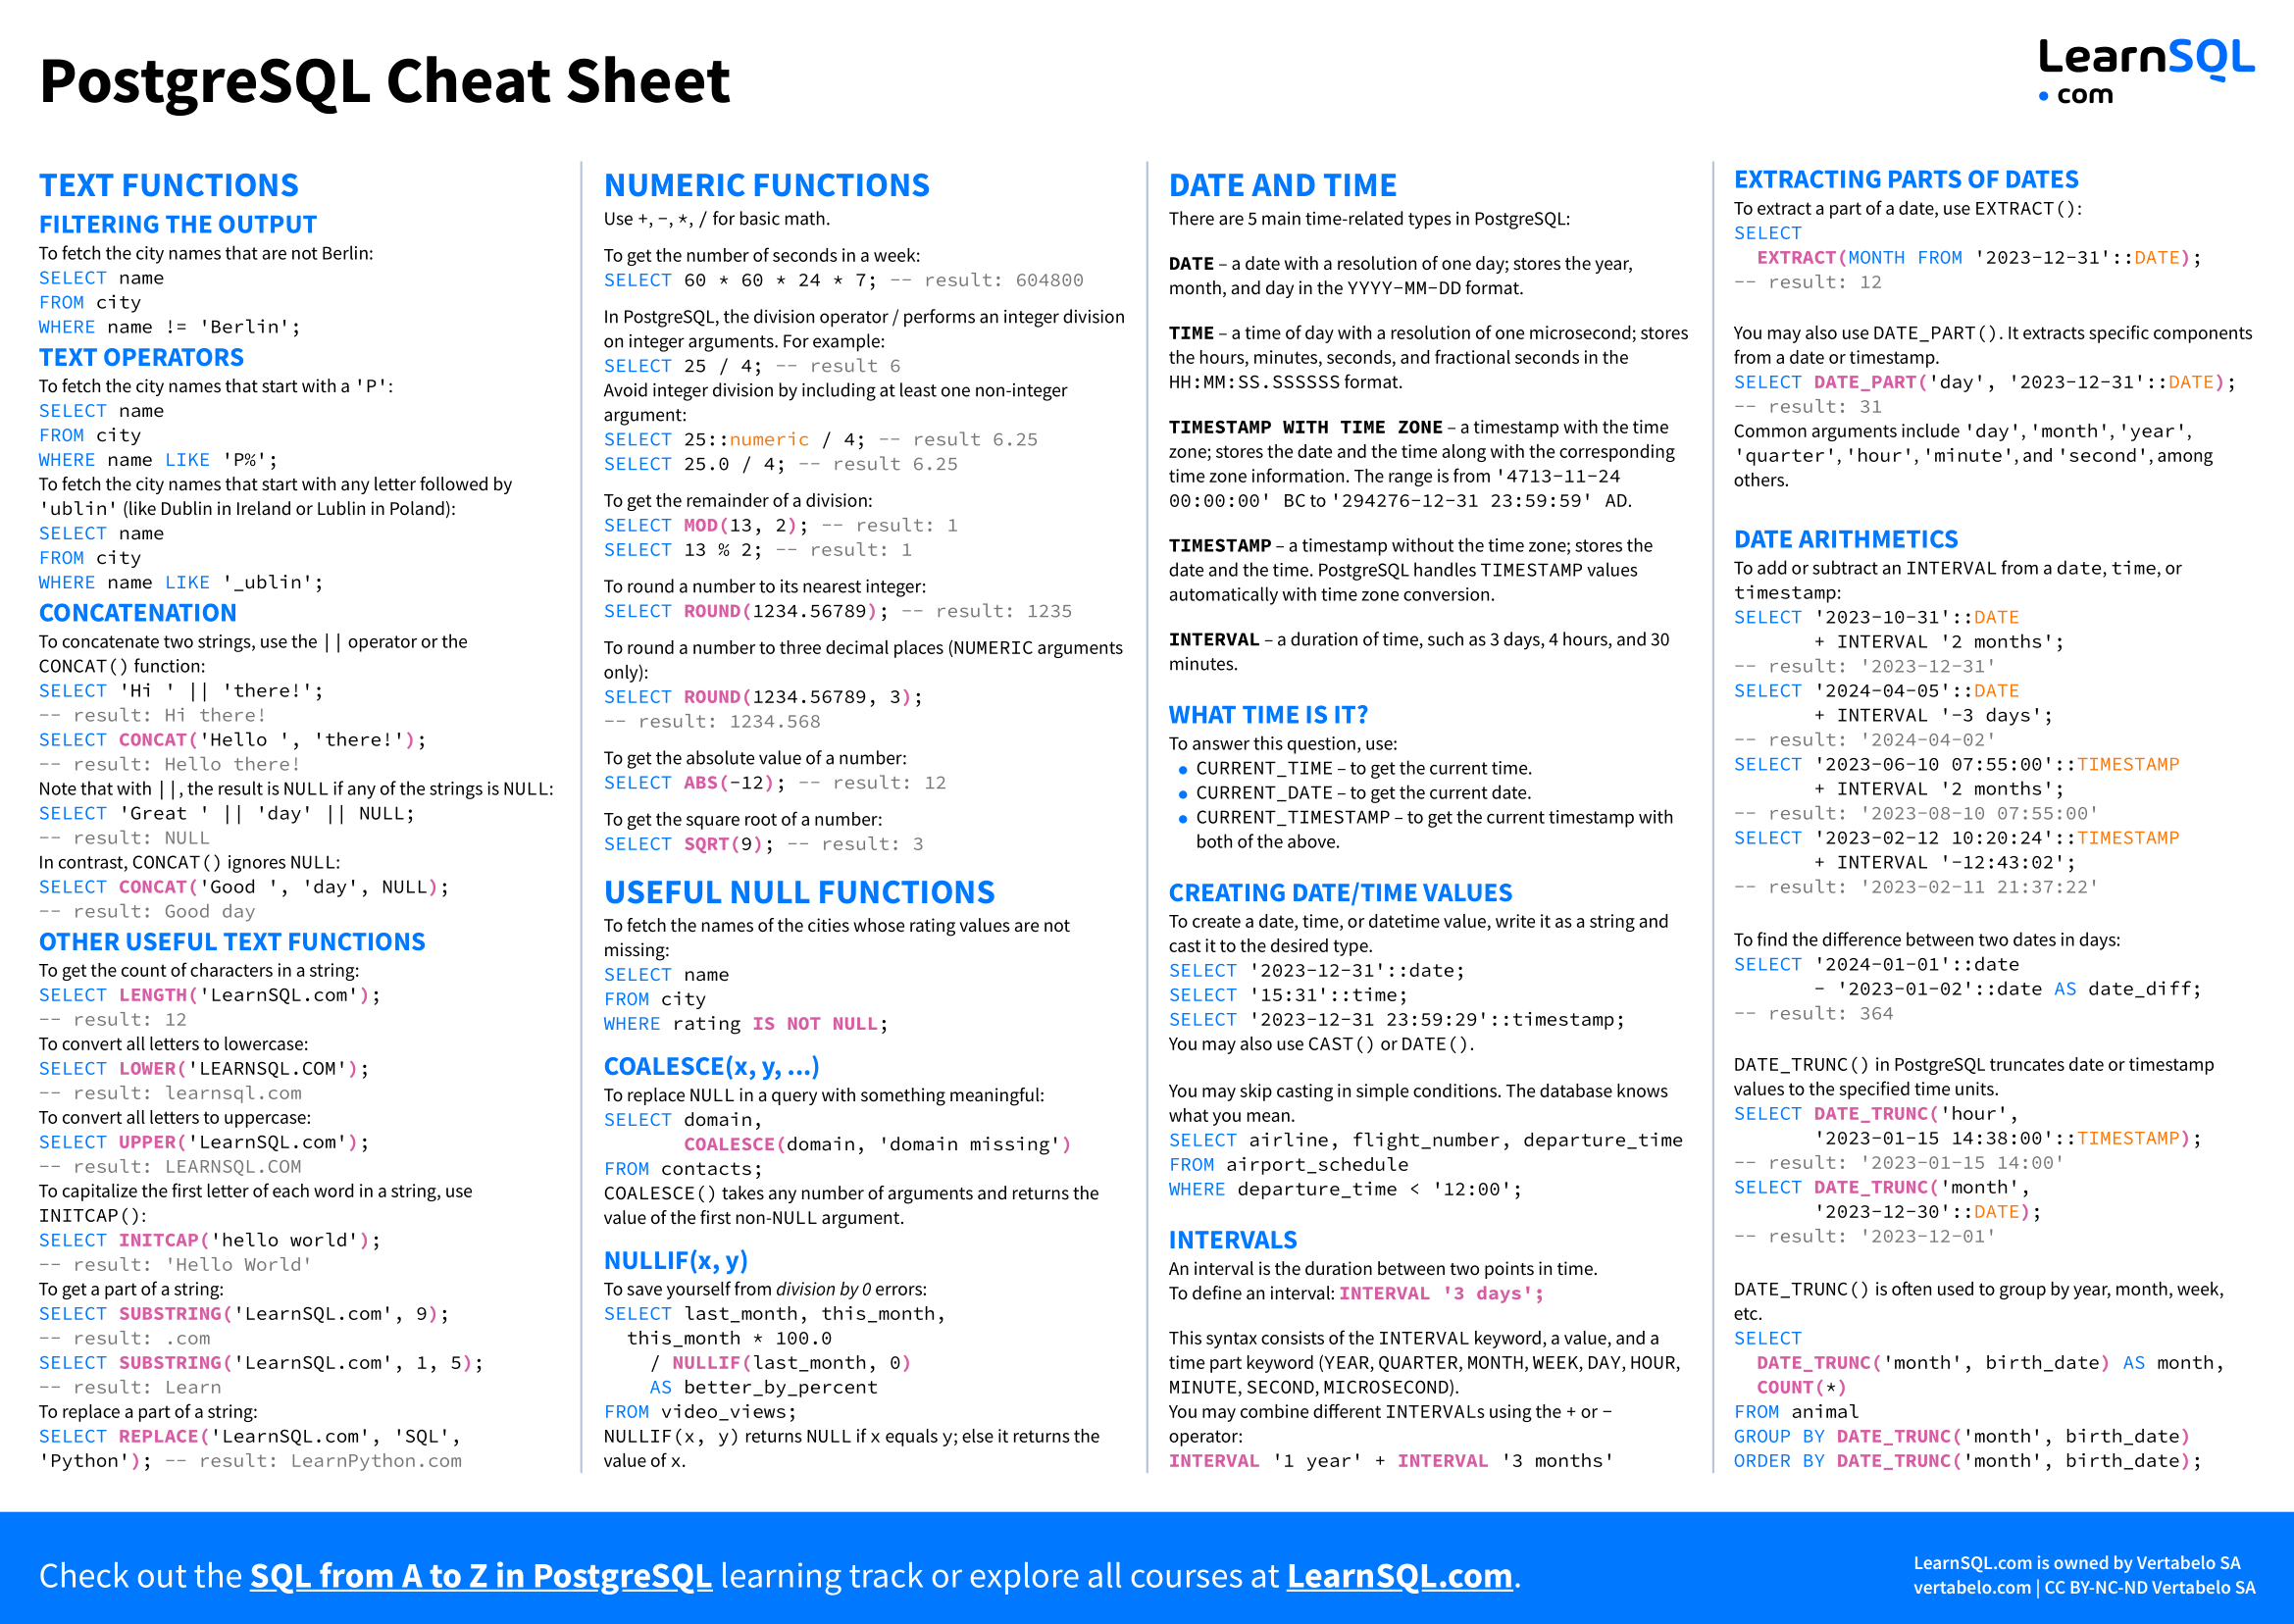 Second page of the PostgreSQL Cheat Sheet